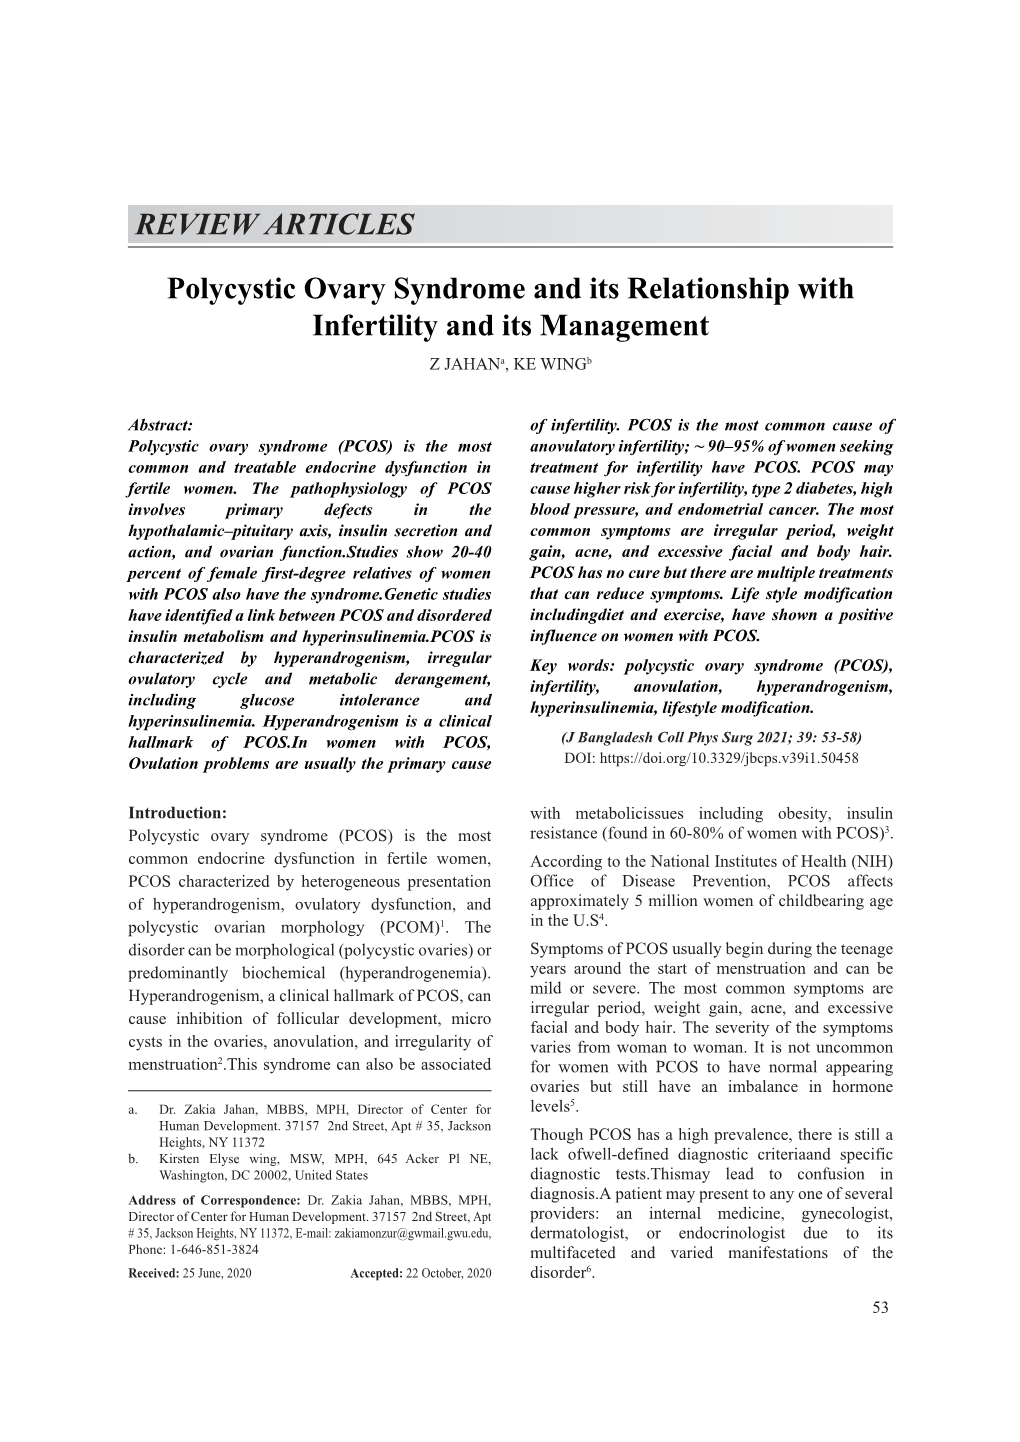 Polycystic Ovary Syndrome and Its Relationship with Infertility and Its Management Z Jahan Et Al